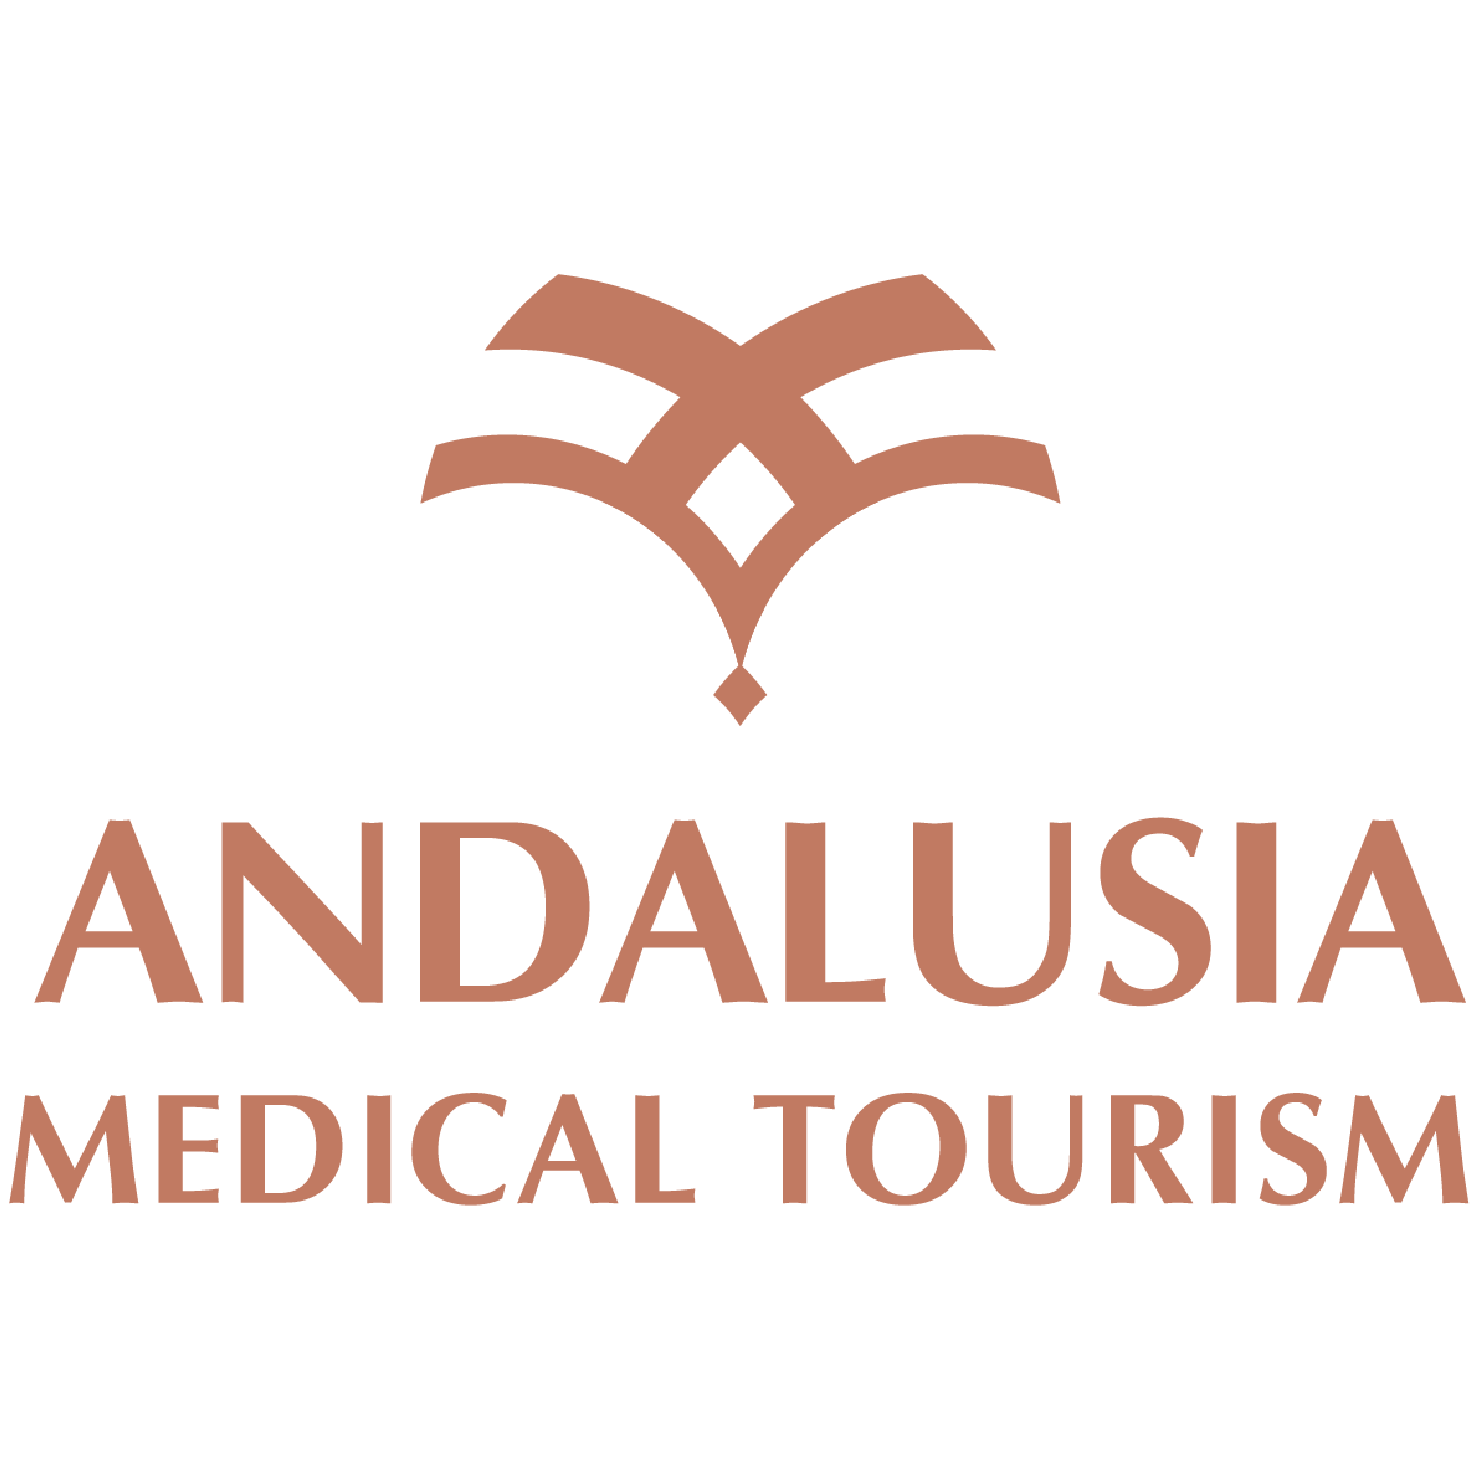 Andalusia Medical Tourism